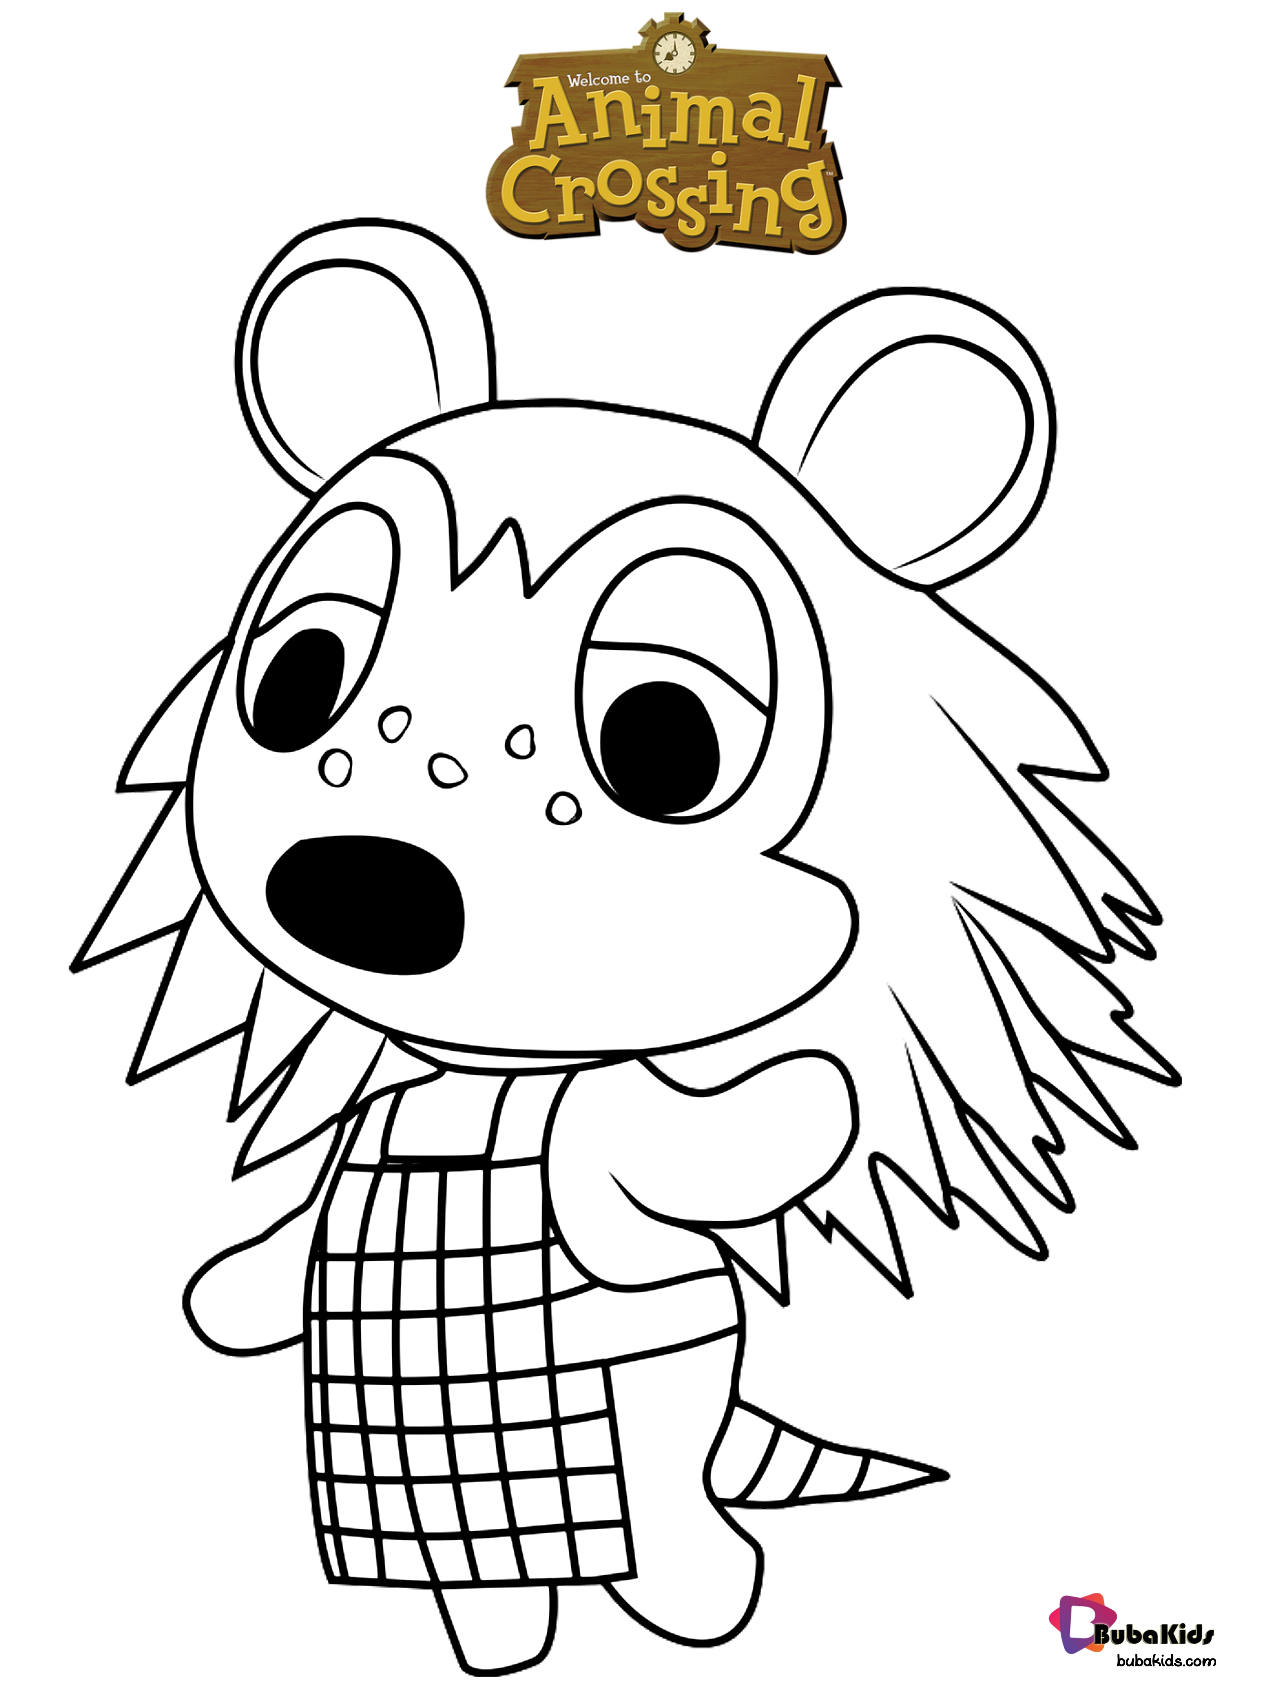 Free download to print sable animal crossing coloring page for kids collection of cartoon coloriâ animal coloring pages animal crossing cartoon coloring pages